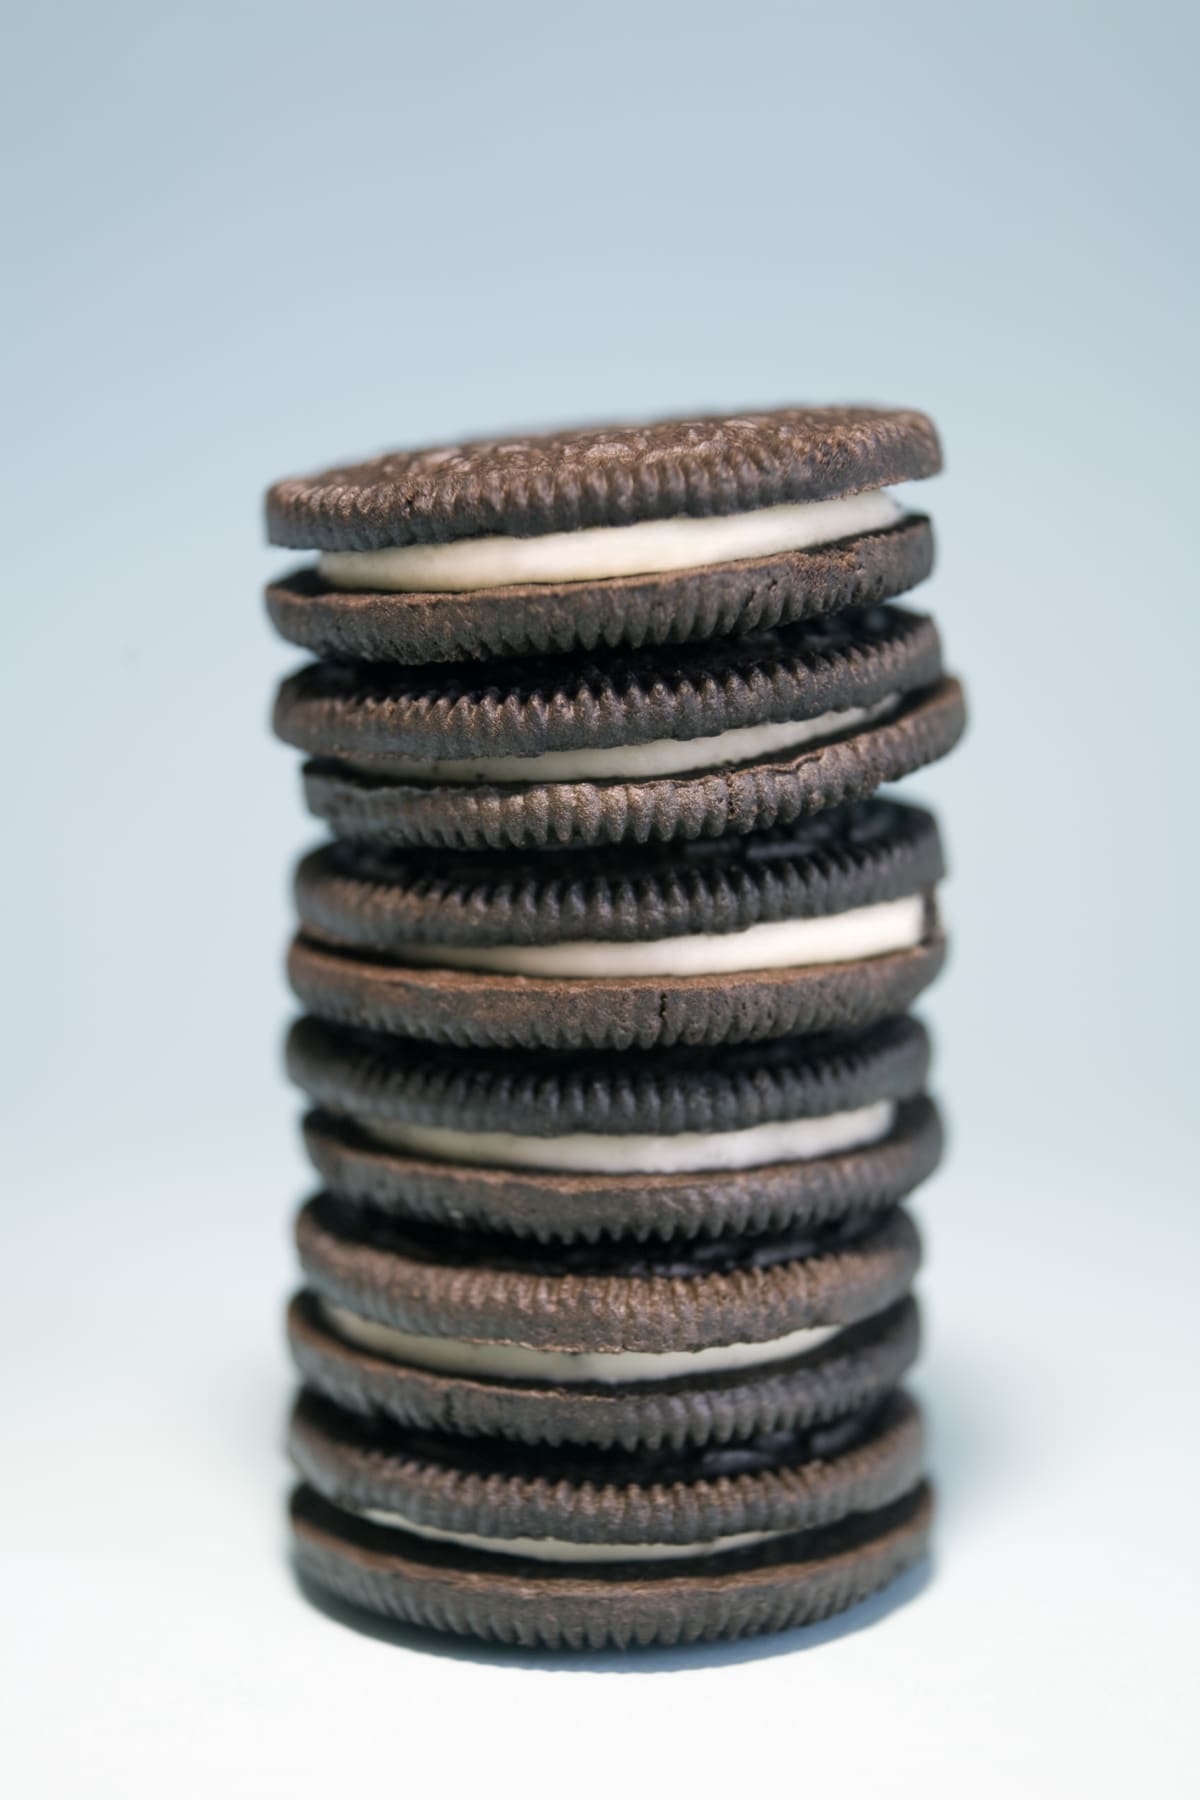 Stack of Oreo sandwich cookies